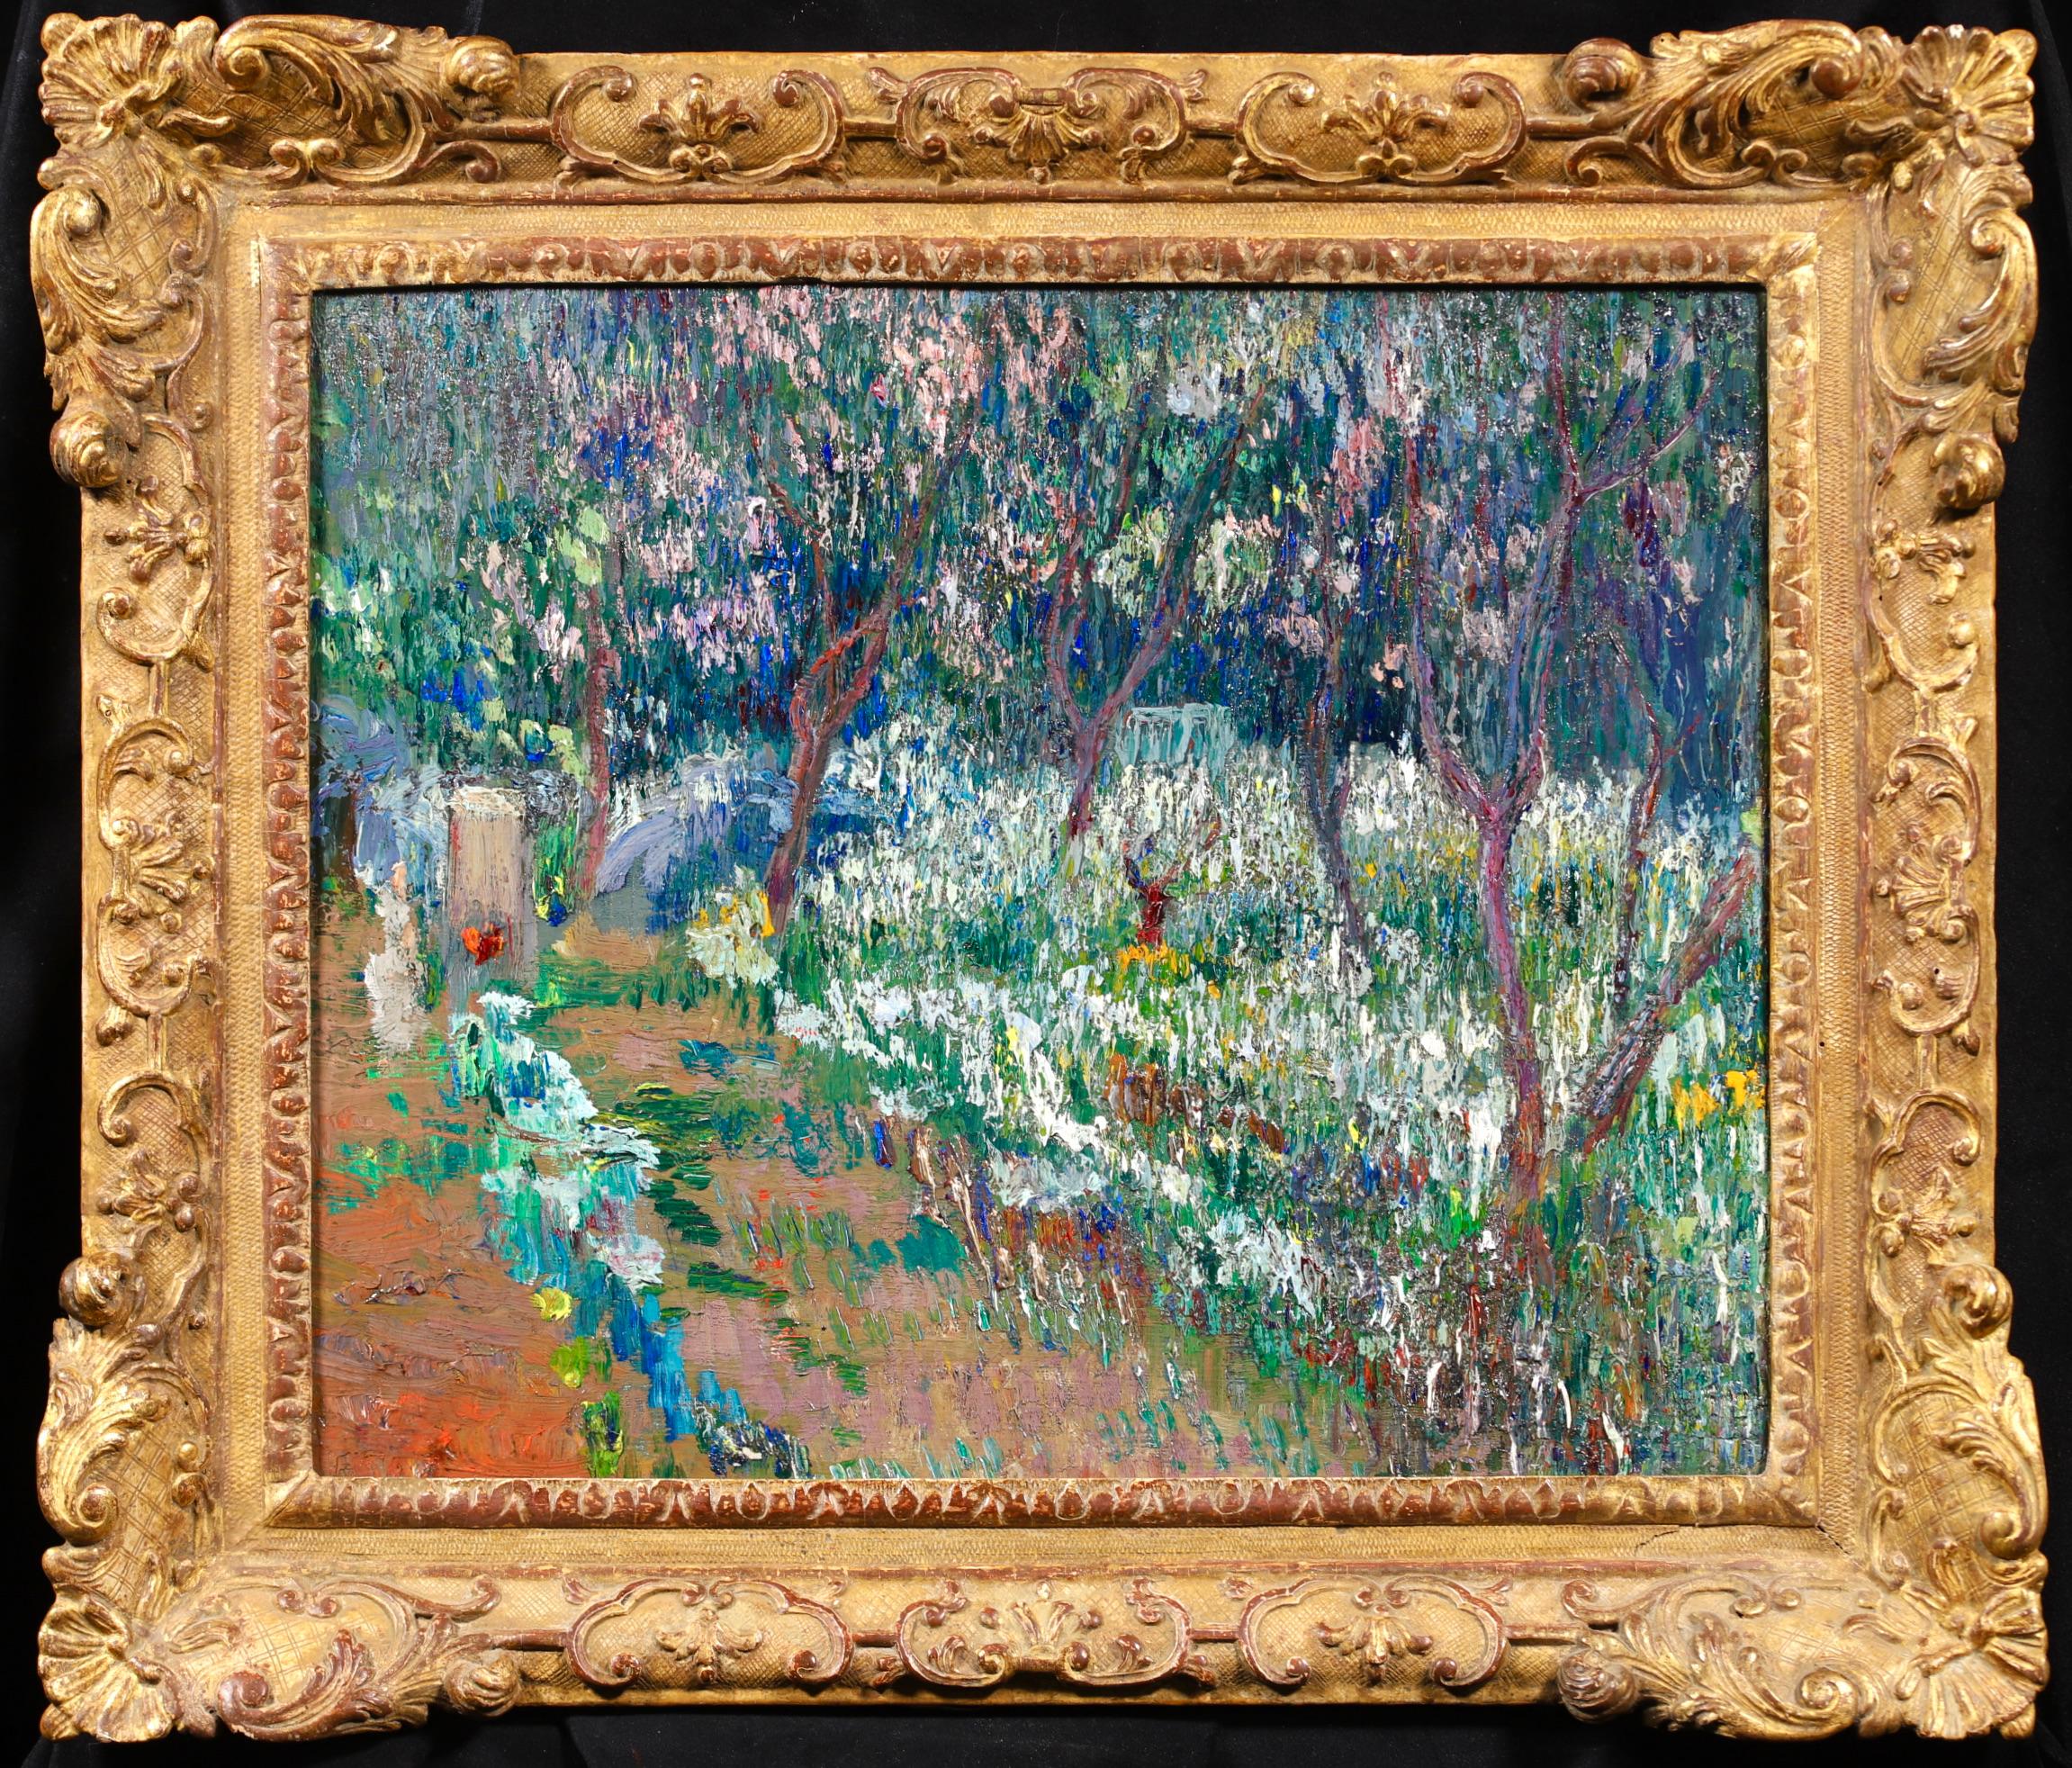 A stunning divisionist style landscape oil on canvas by American impressionist painter Lilla Cabot Perry. The work depicts a beautiful garden in Giverny in bloom. The trees are covered in pink blossom and white, blue and yellow flowers blanket the